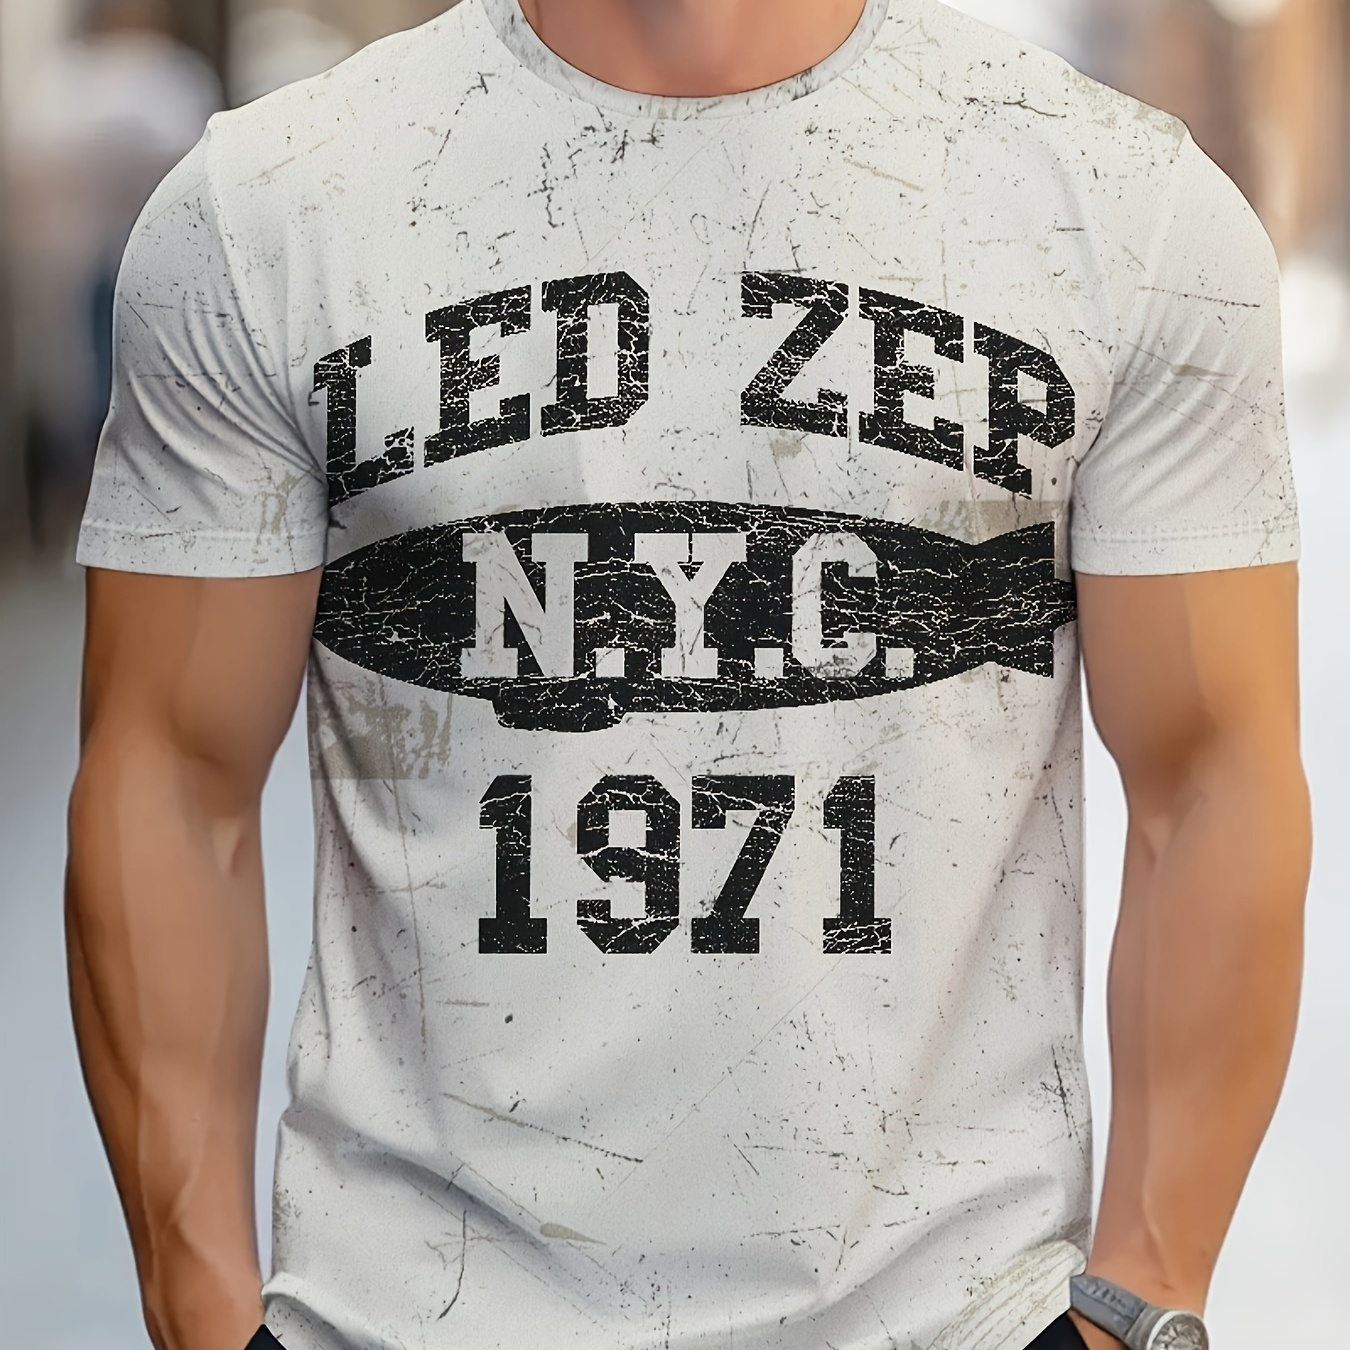 

Men's Led Zep N.y.c. 1971 Graphic Print T-shirt, Short Sleeve Crew Neck Tee, Men's Clothing For Summer Outdoor